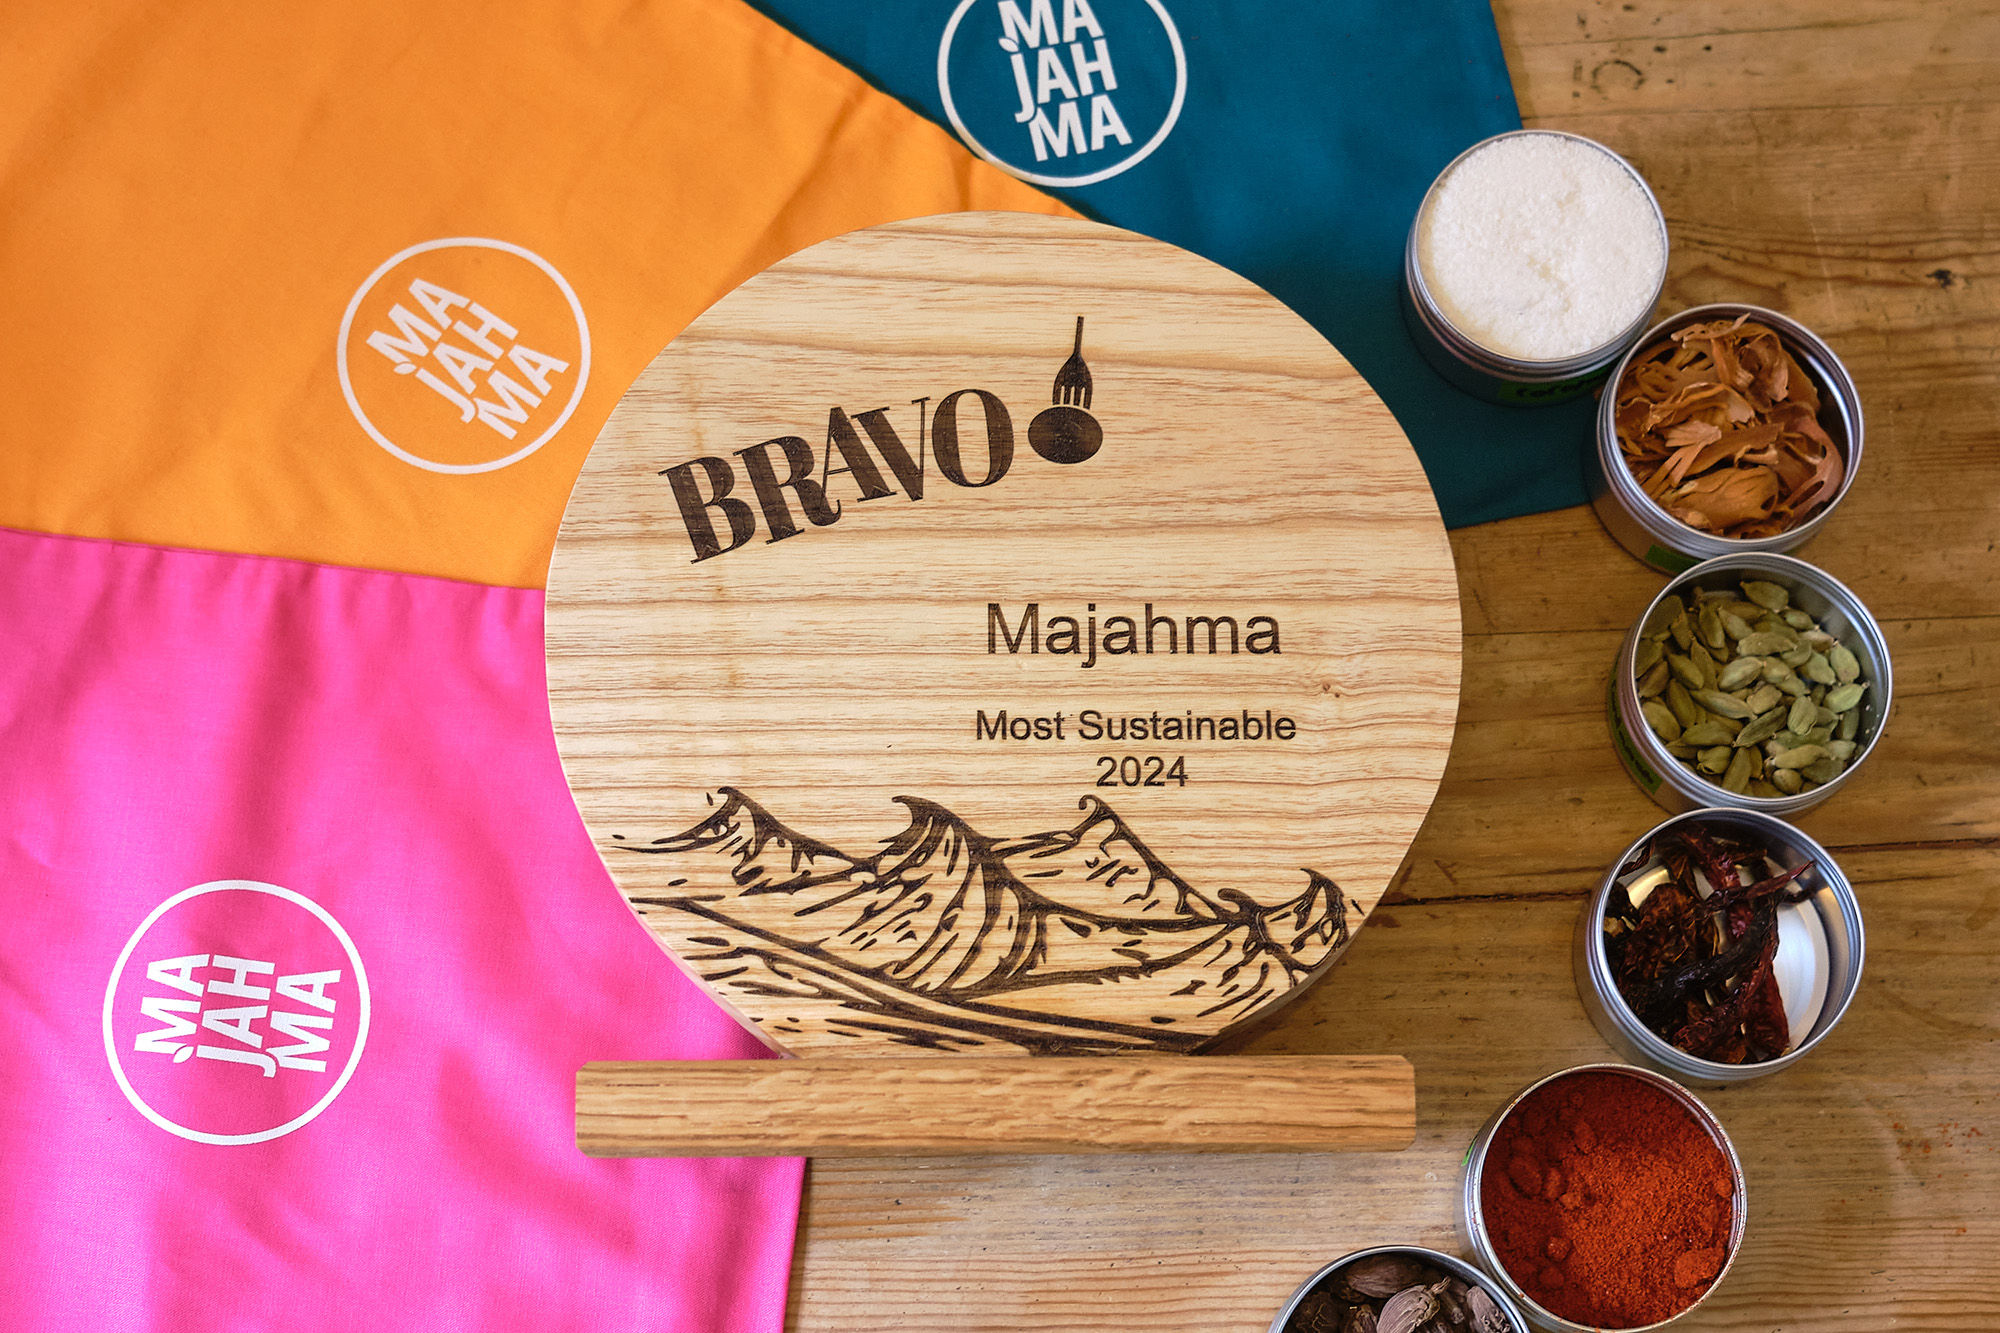 A run down of Brighton's top 20 most sustainable restaurants or businesses having a strong sustainable ethos. Pictured, the winner Majahma (Tiffin Delivery) and their trophy against a backdrop of their herbs and spices.